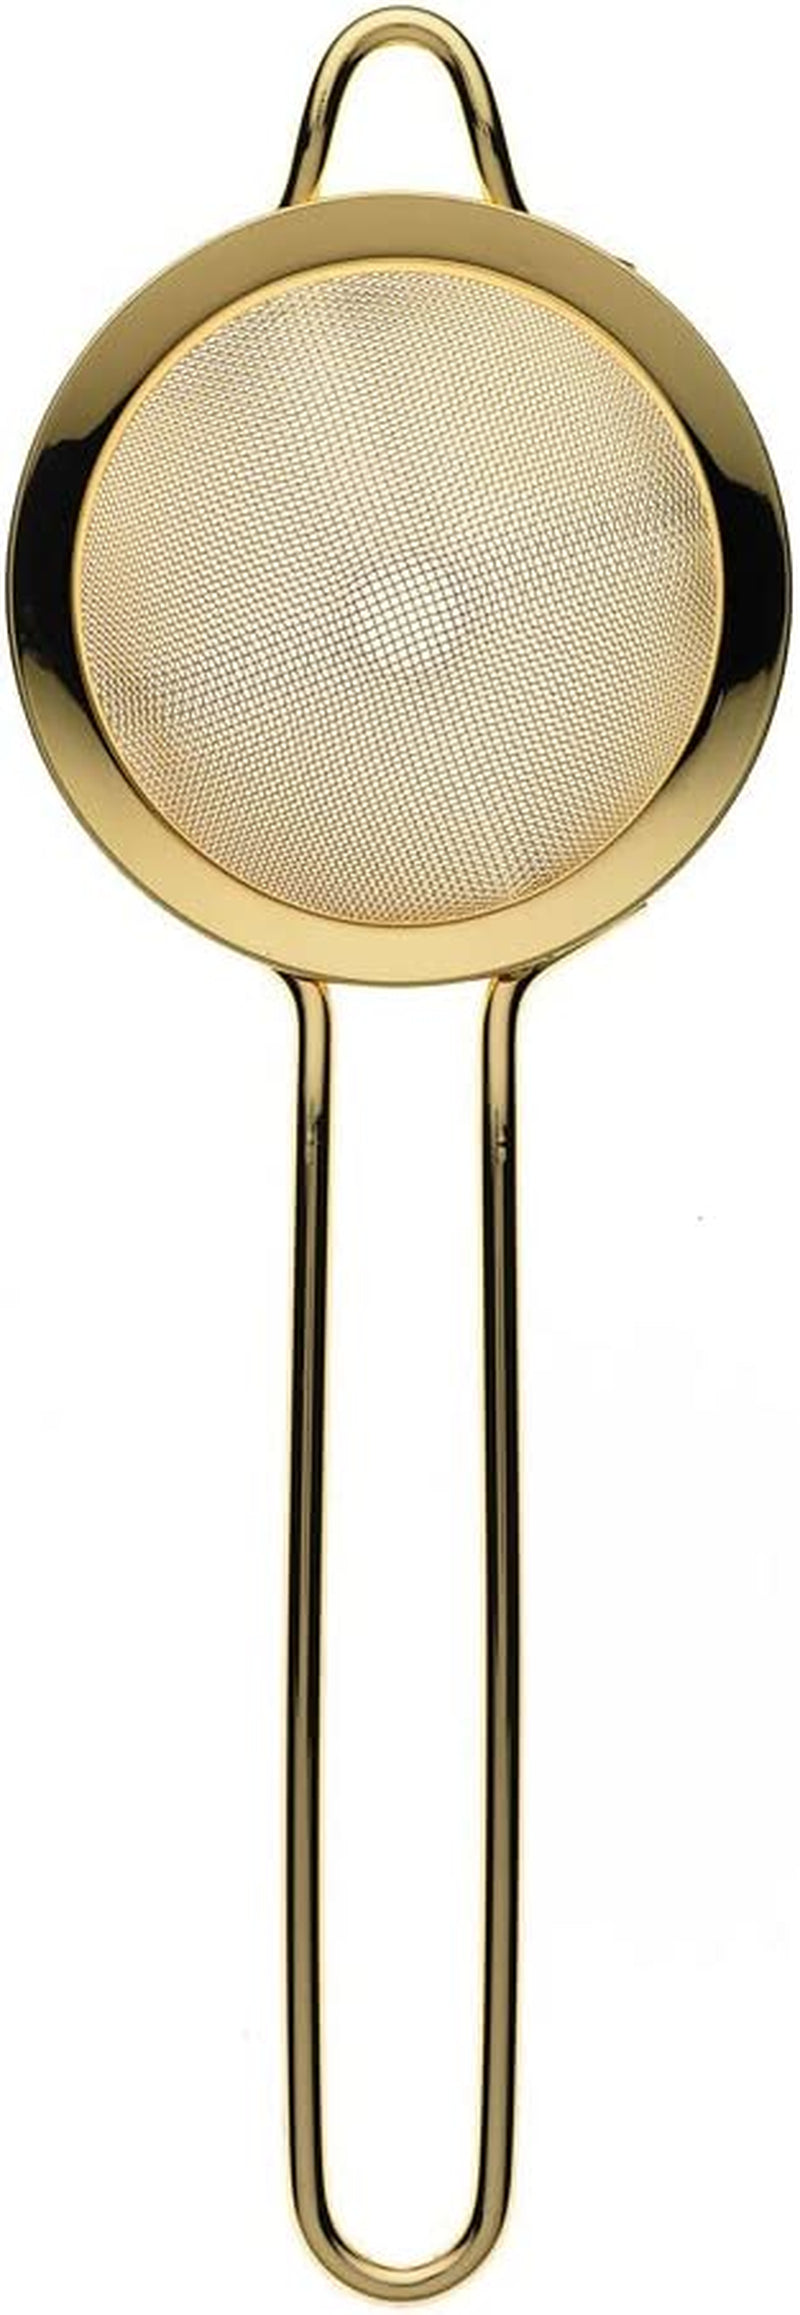 Barfly Fine Mesh Cocktail Strainer, Stainless